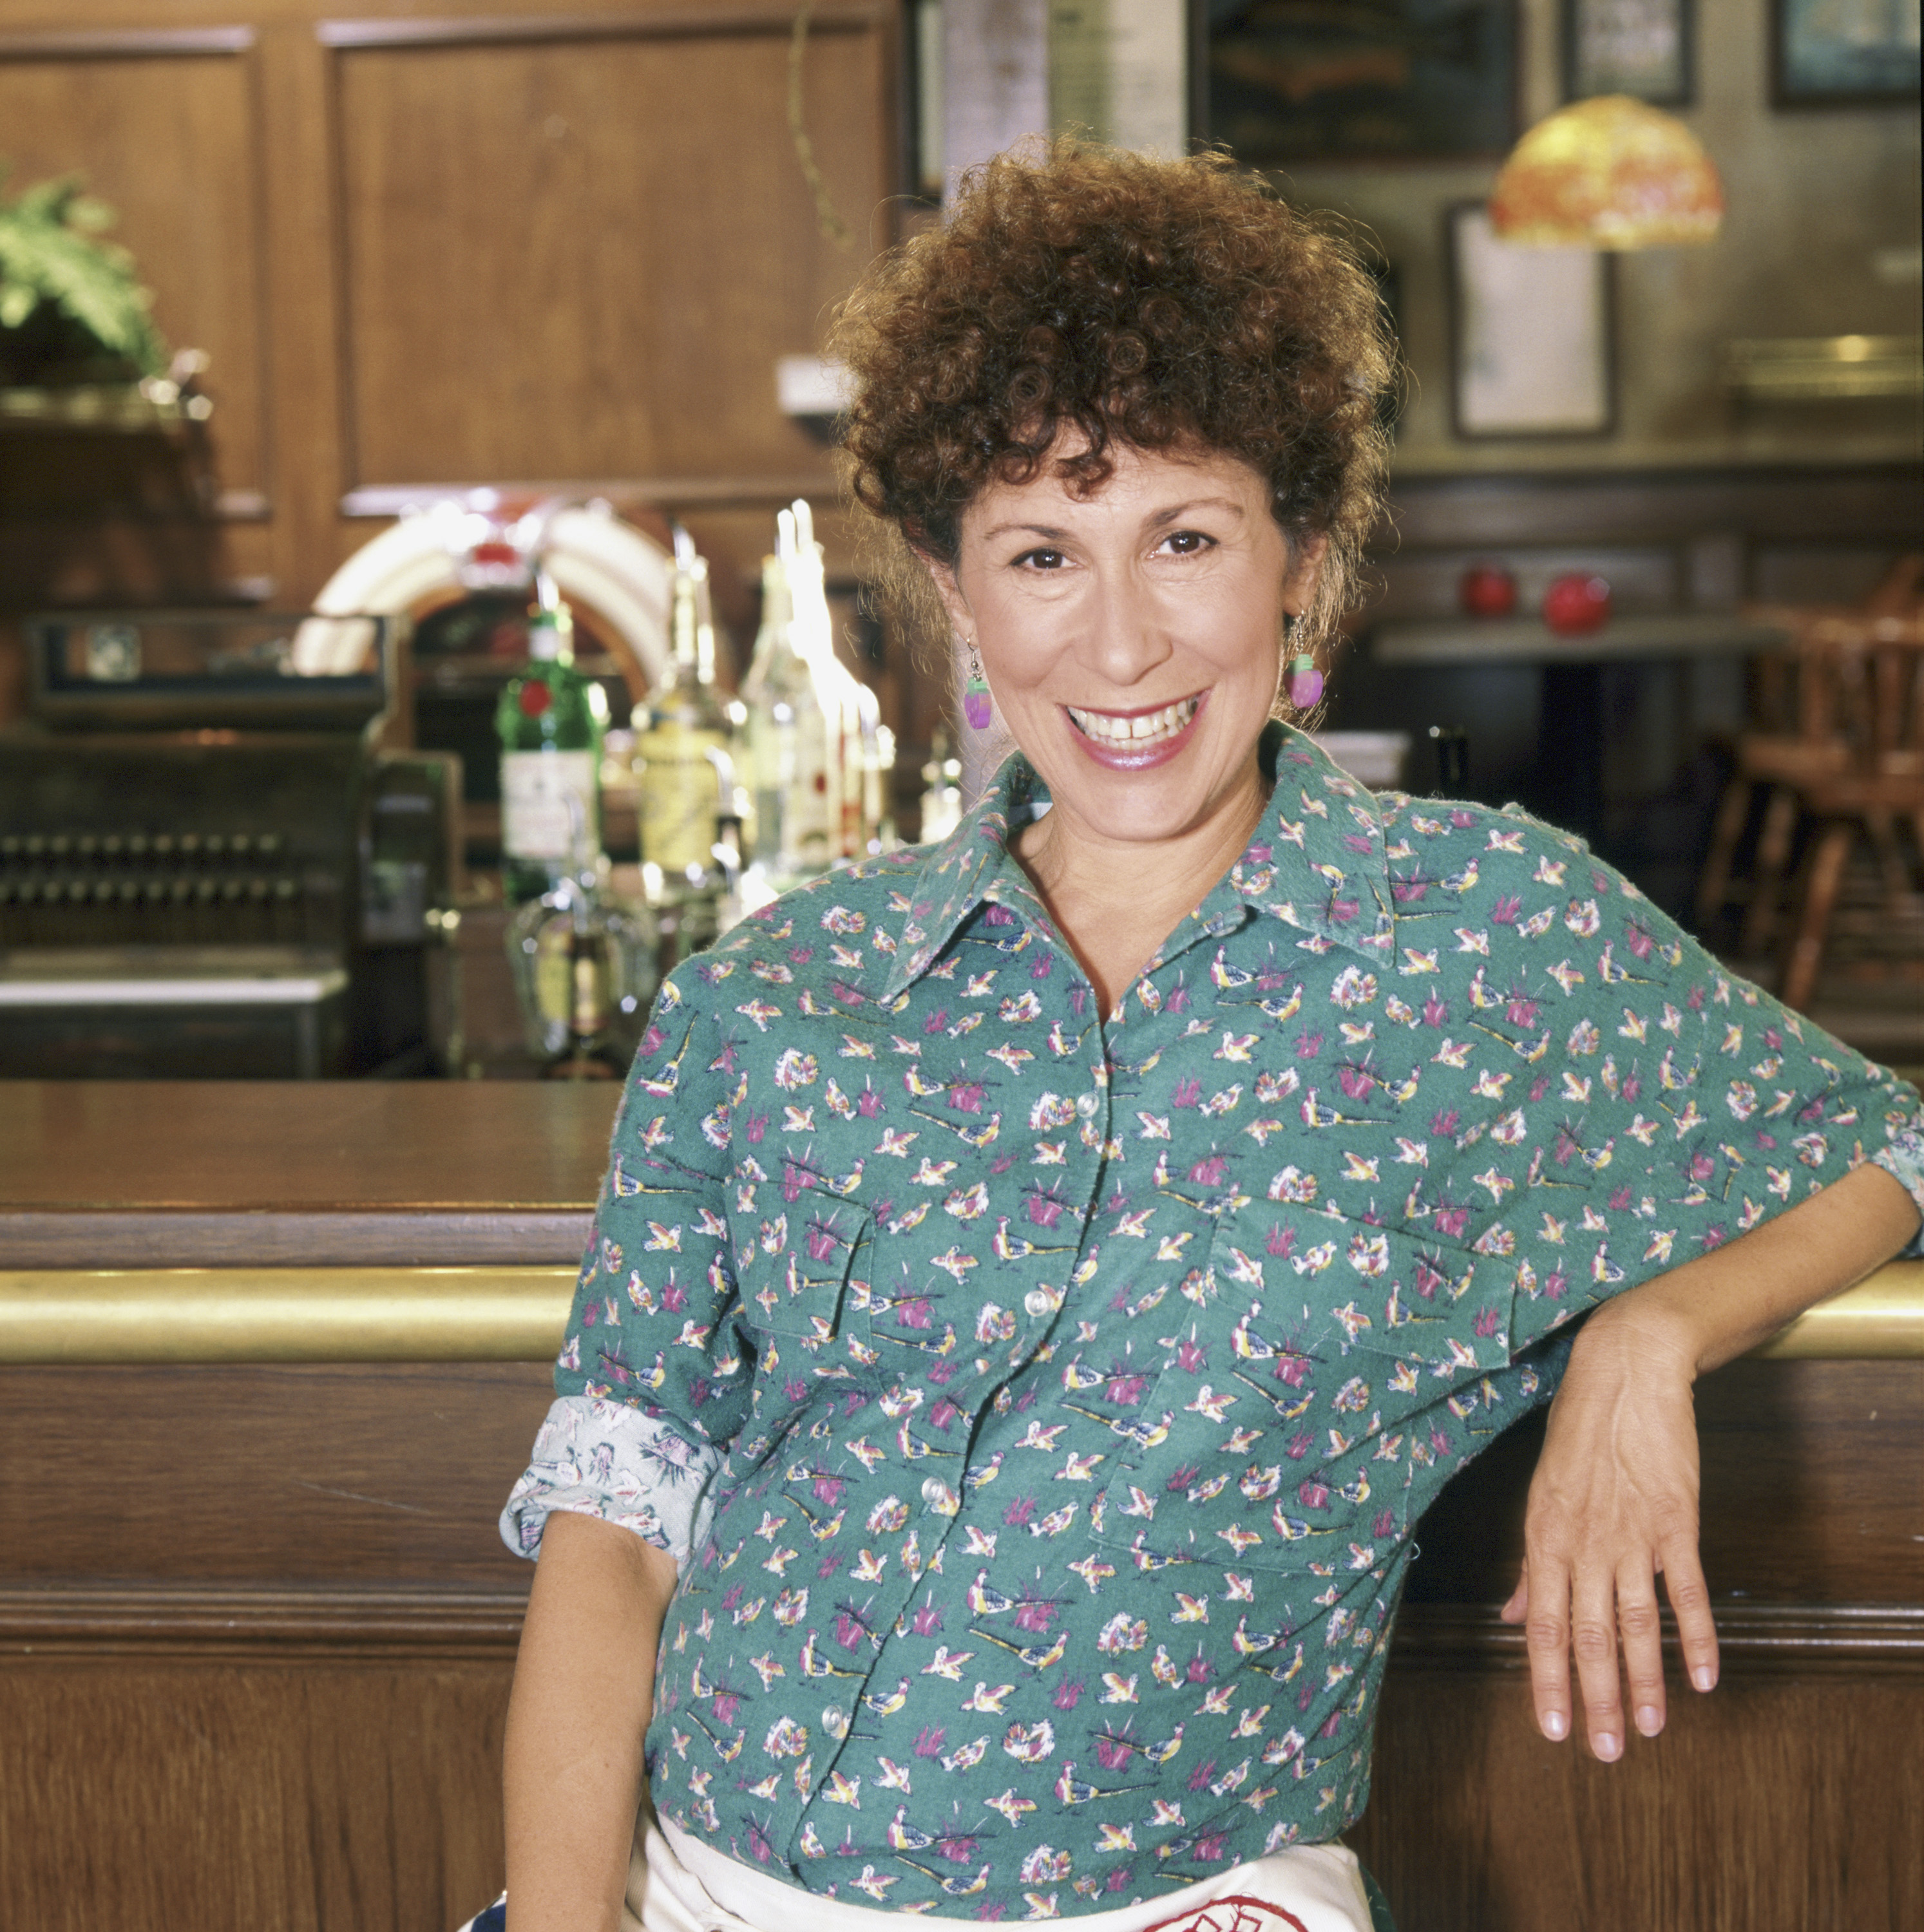 Rhea Perlman as Carla Tortelli in the sitcom "Cheers" in 1990 | Source: Getty Images